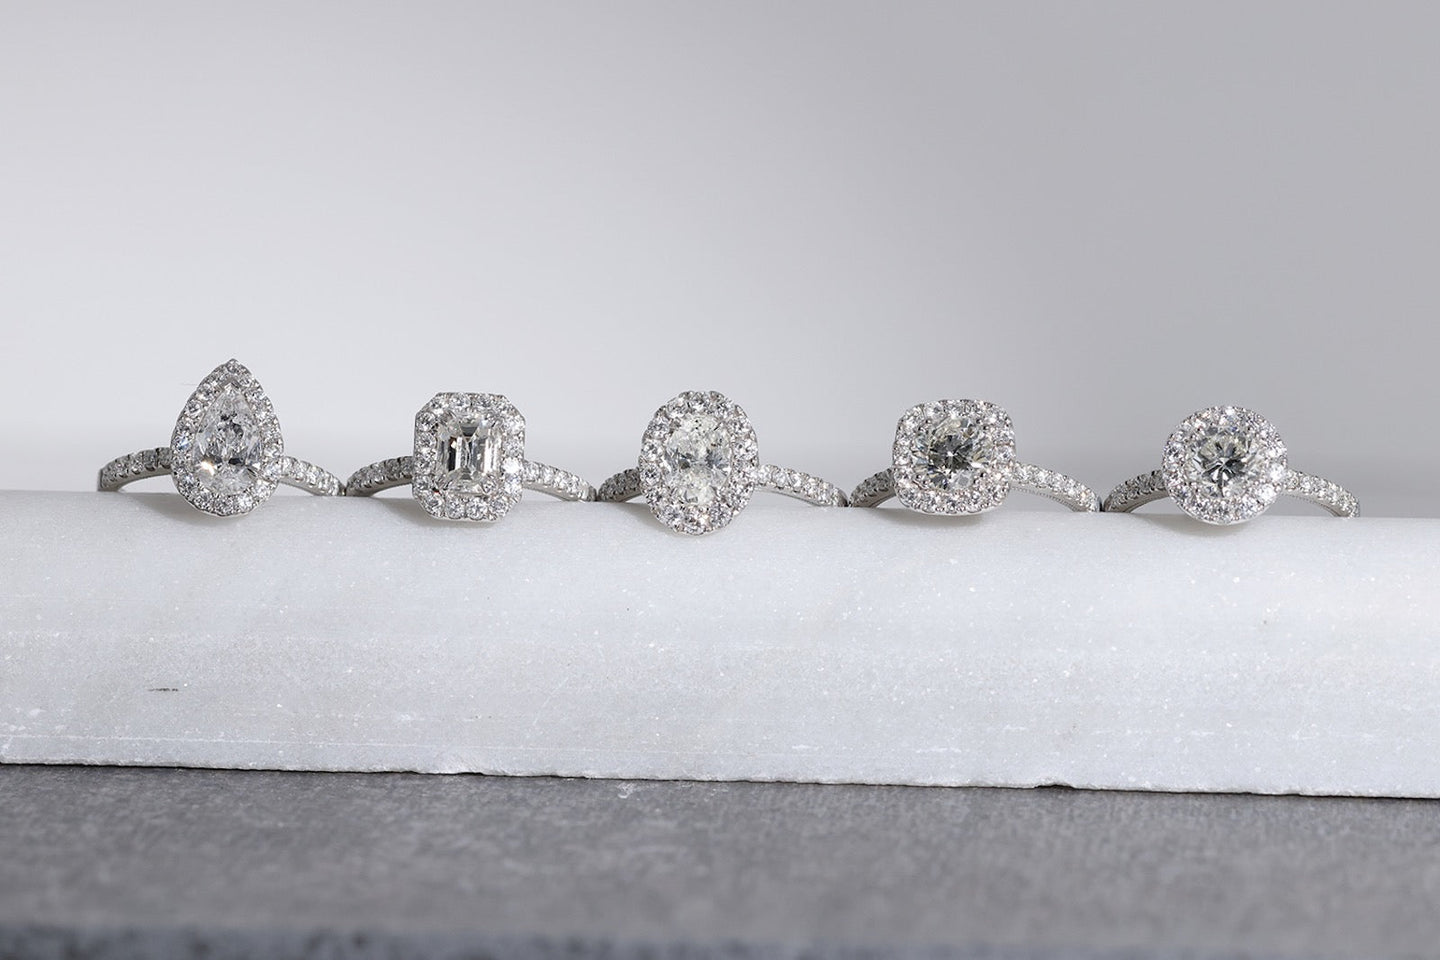 Together Complete The Together Complete Collection by MK Diamonds features mountings that are created specifically for the center diamond showcased in that individual piece because no two diamonds are exactly alike.